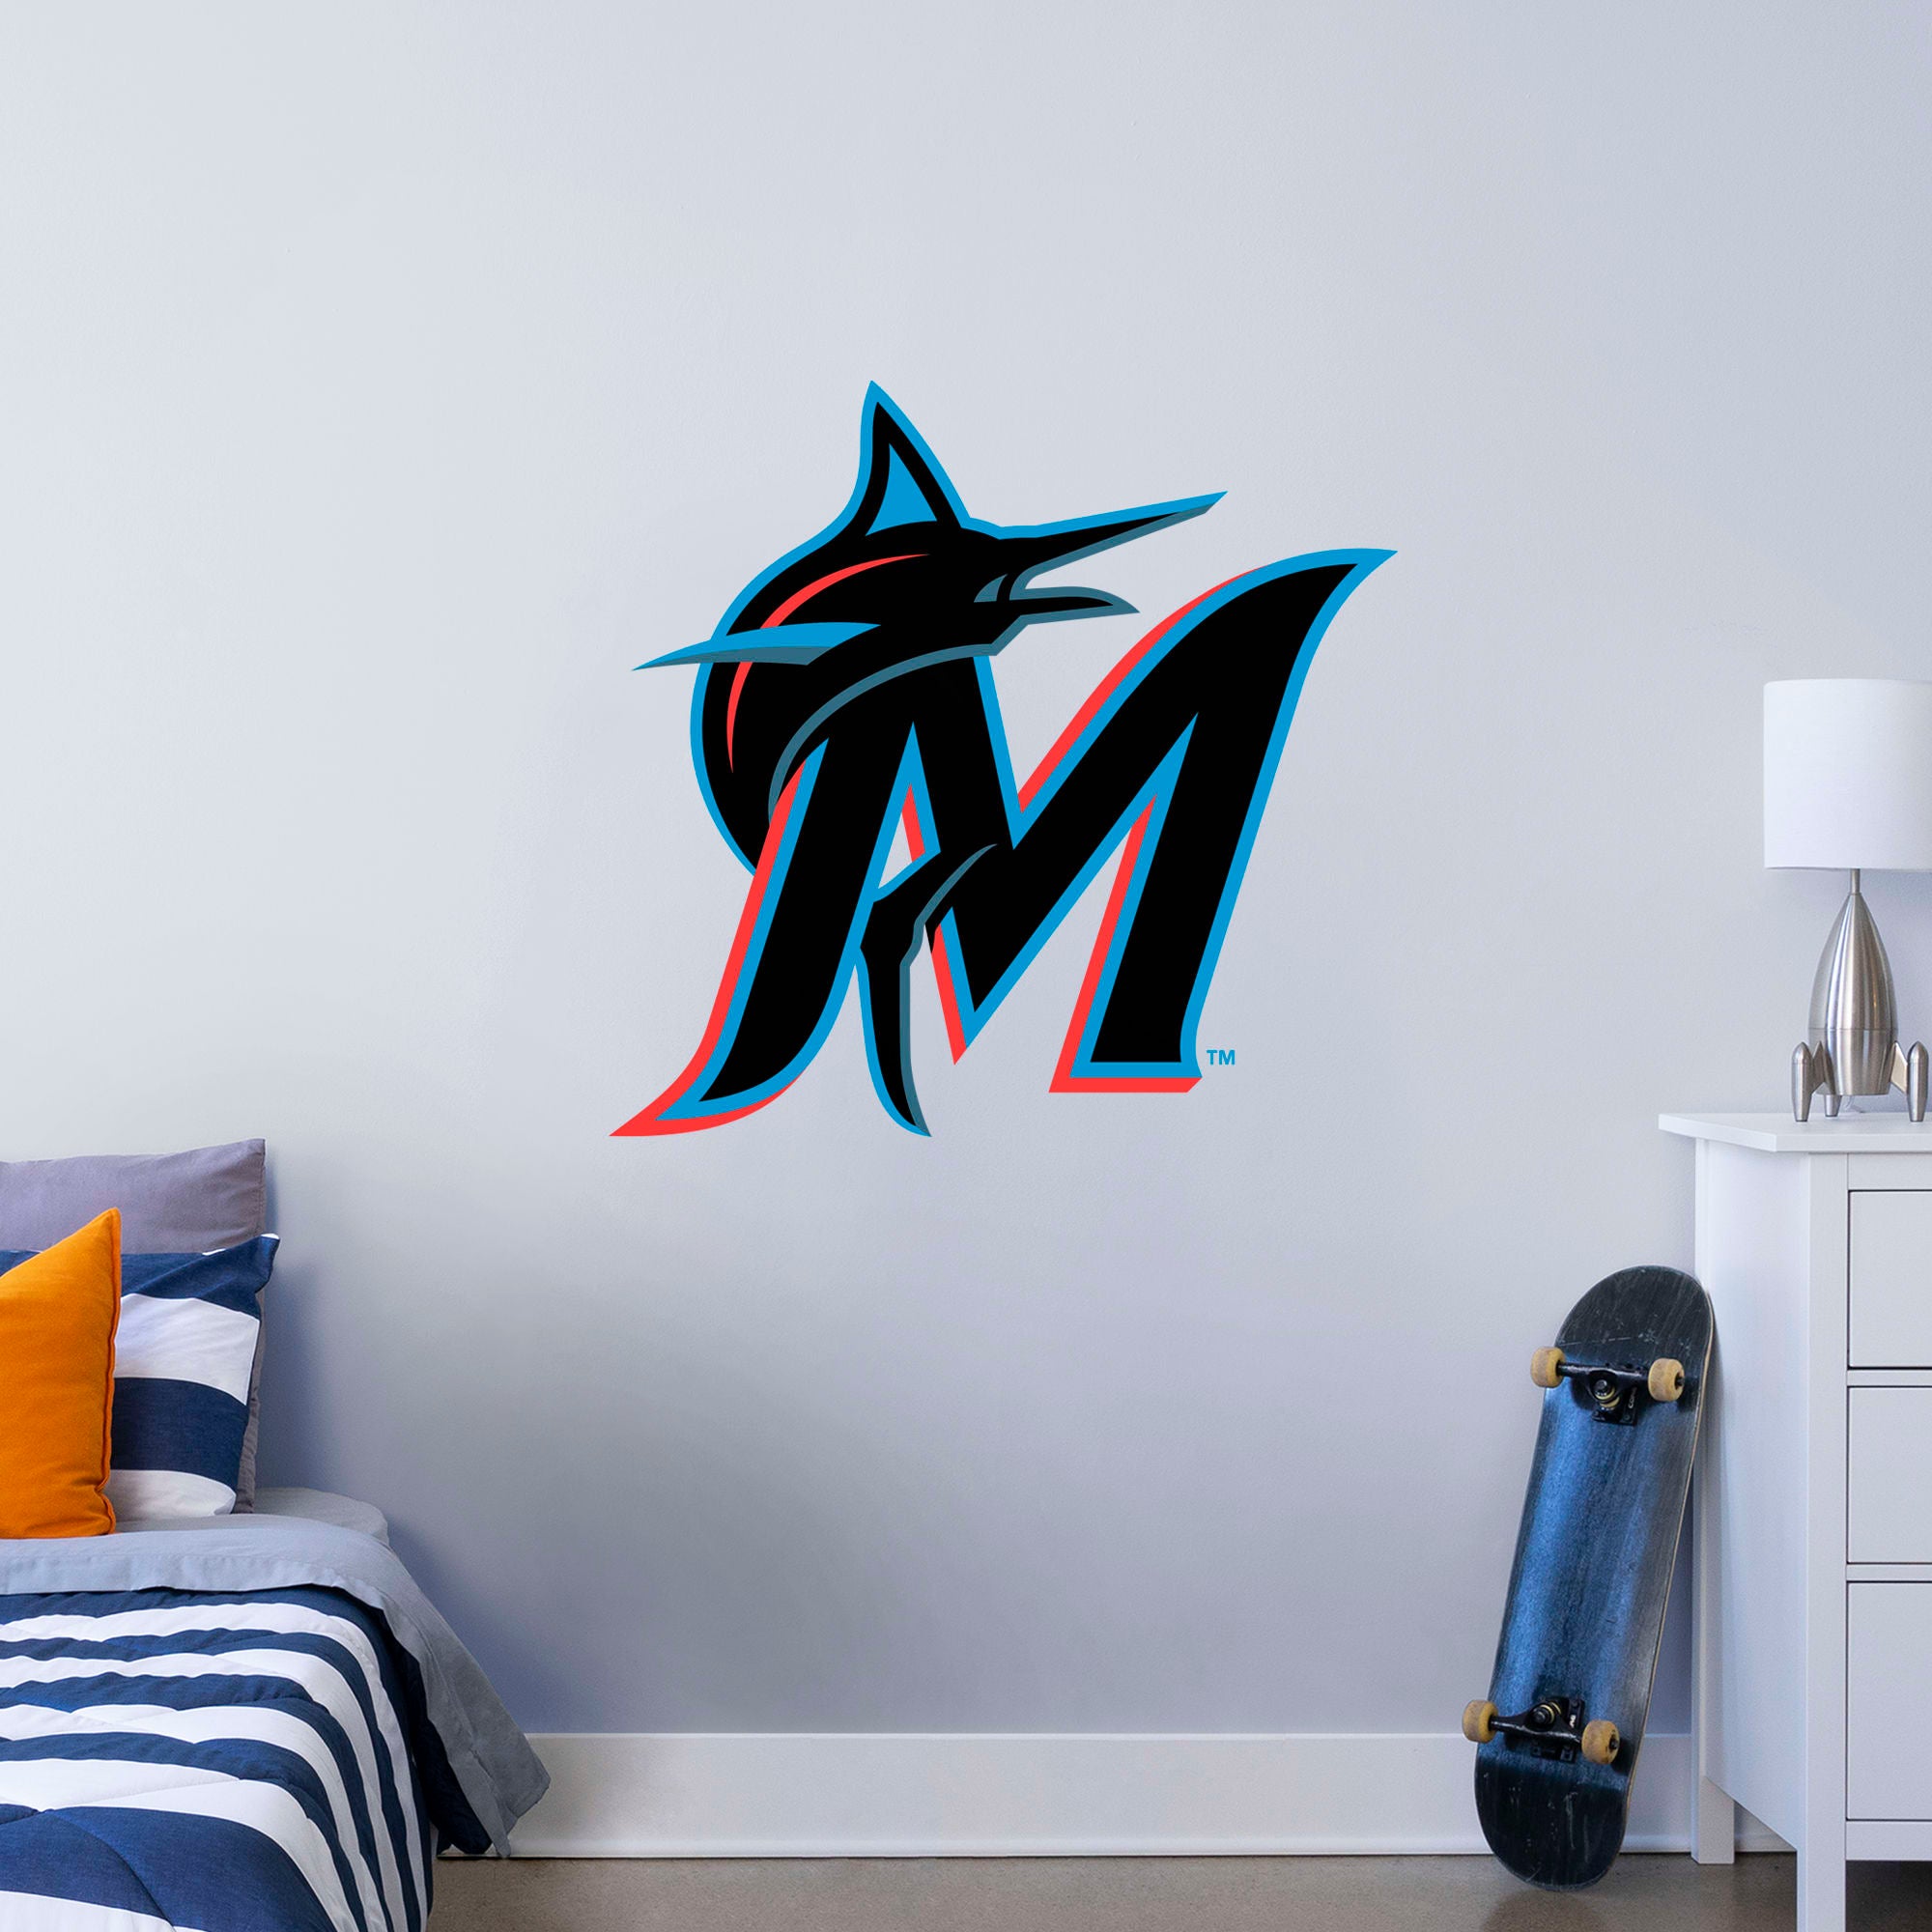 Miami Marlins: Logo - Officially Licensed MLB Removable Wall Decal Giant Logo (40"W x 39"H) by Fathead | Vinyl